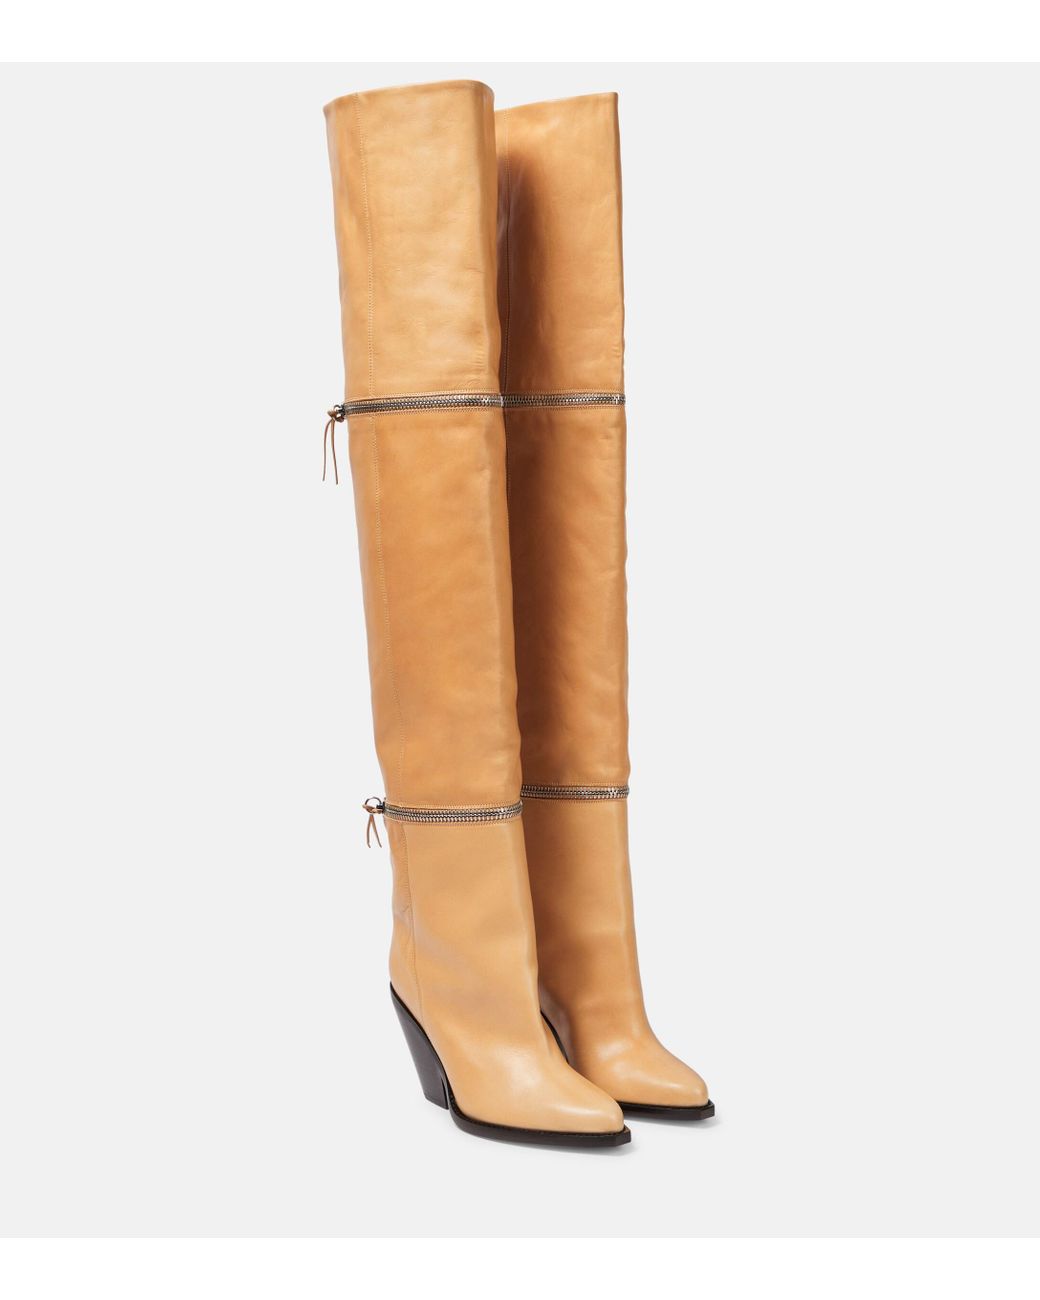 Isabel Marant Lelodie Leather Over The Knee Boots in Brown | Lyst Australia